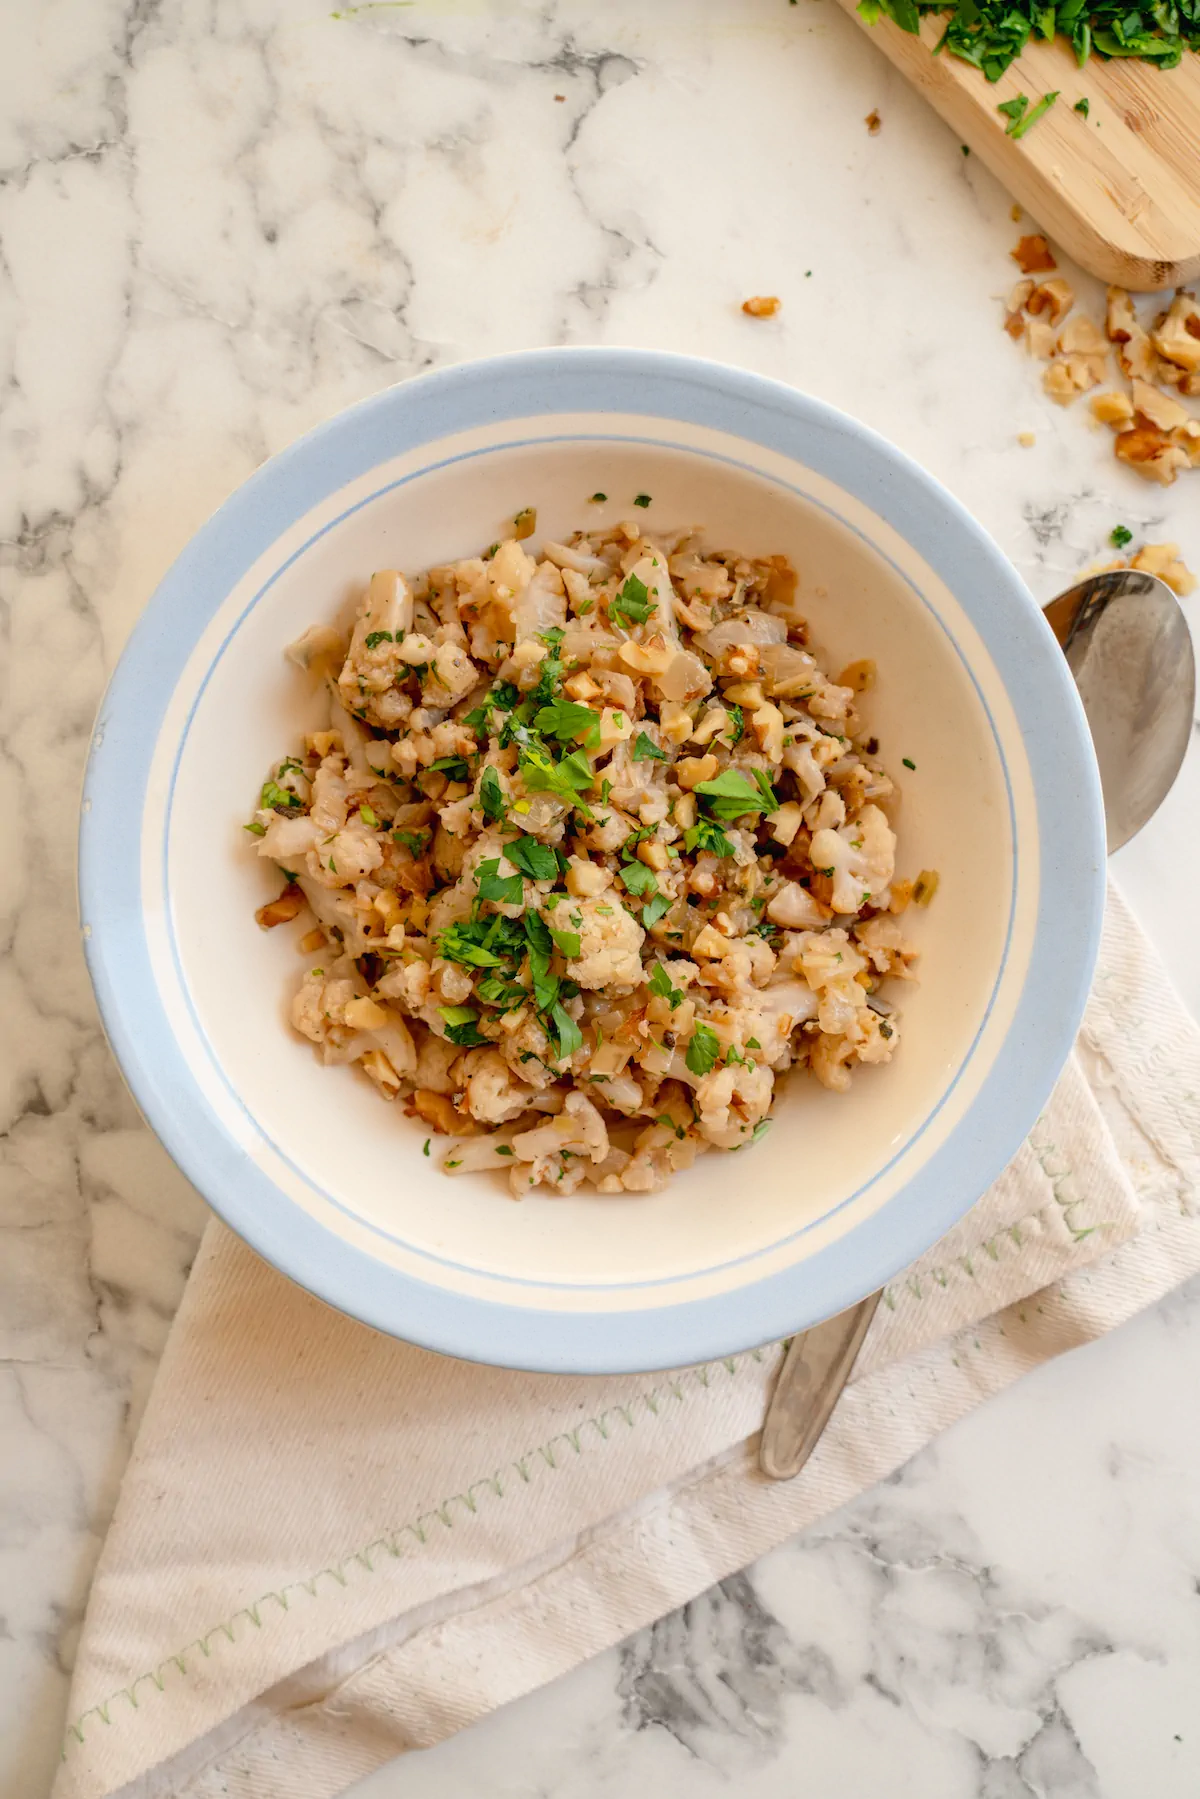 Low-carb cauliflower stuffing garnished with fresh herbs in a bowl alongside a spoon.